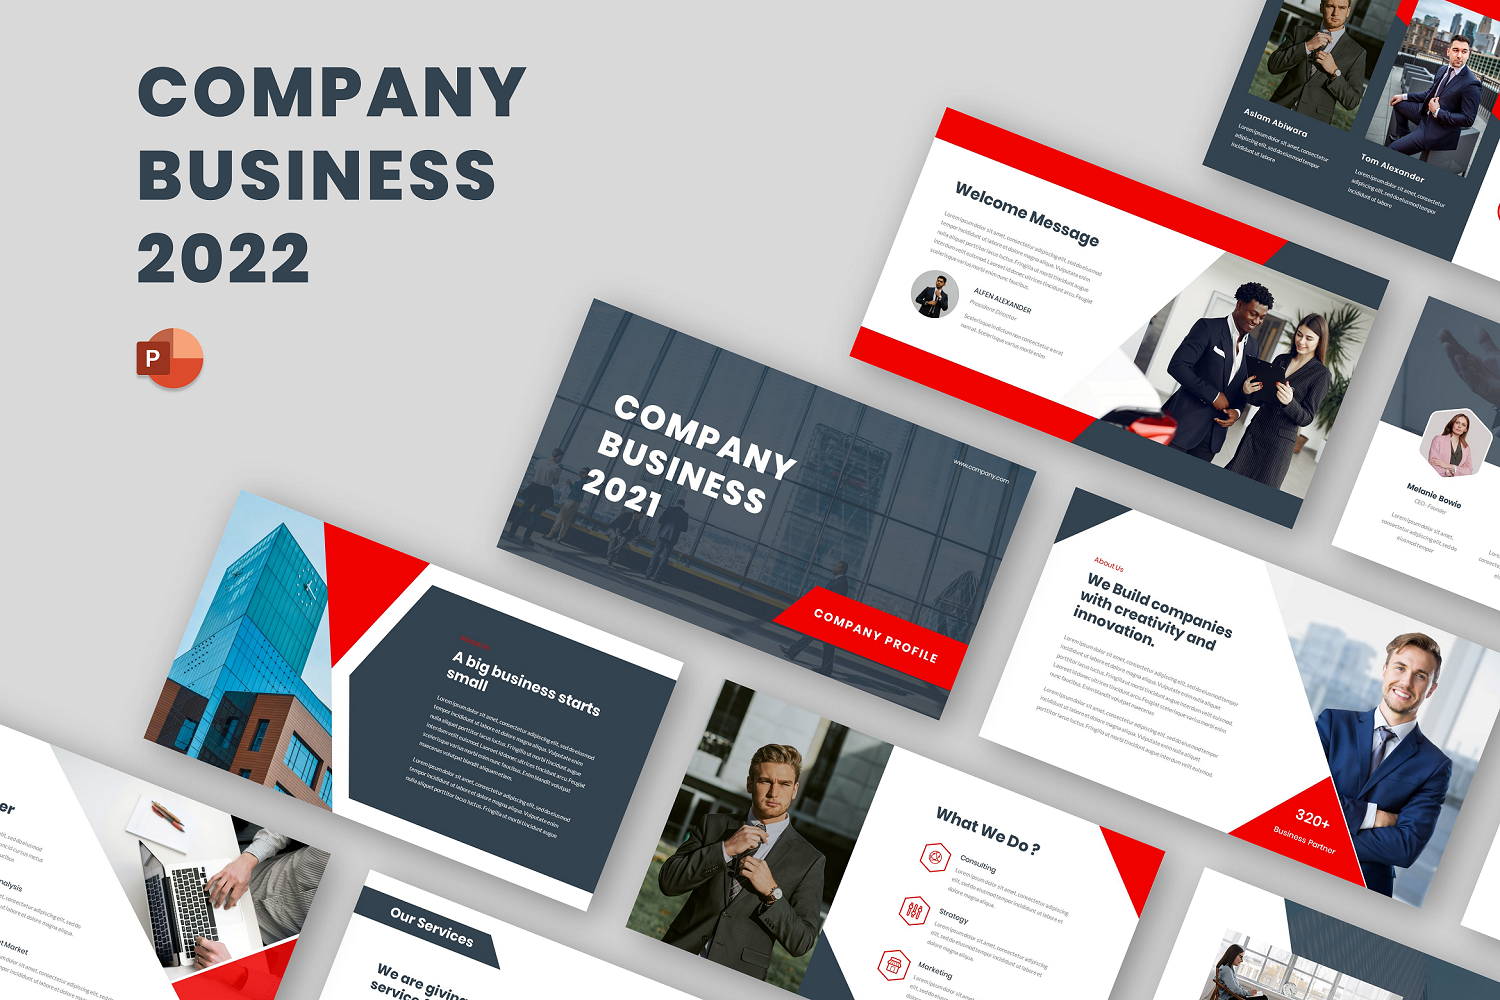 Company Business & Company Profile PowerPoint Template